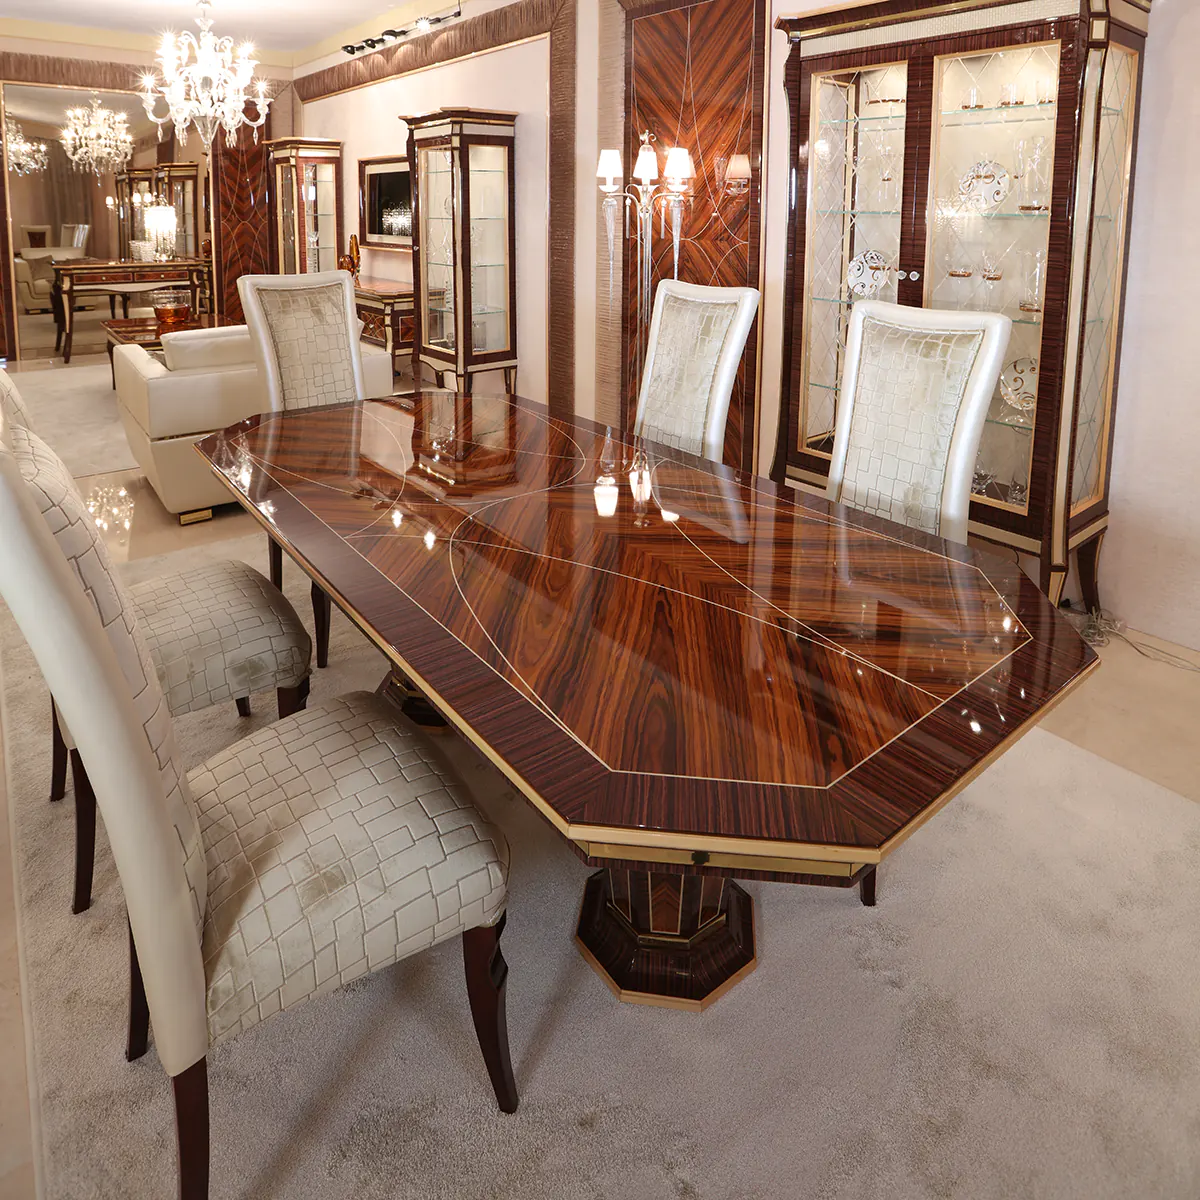 Monte Carlo LUX table with 2 pedestals